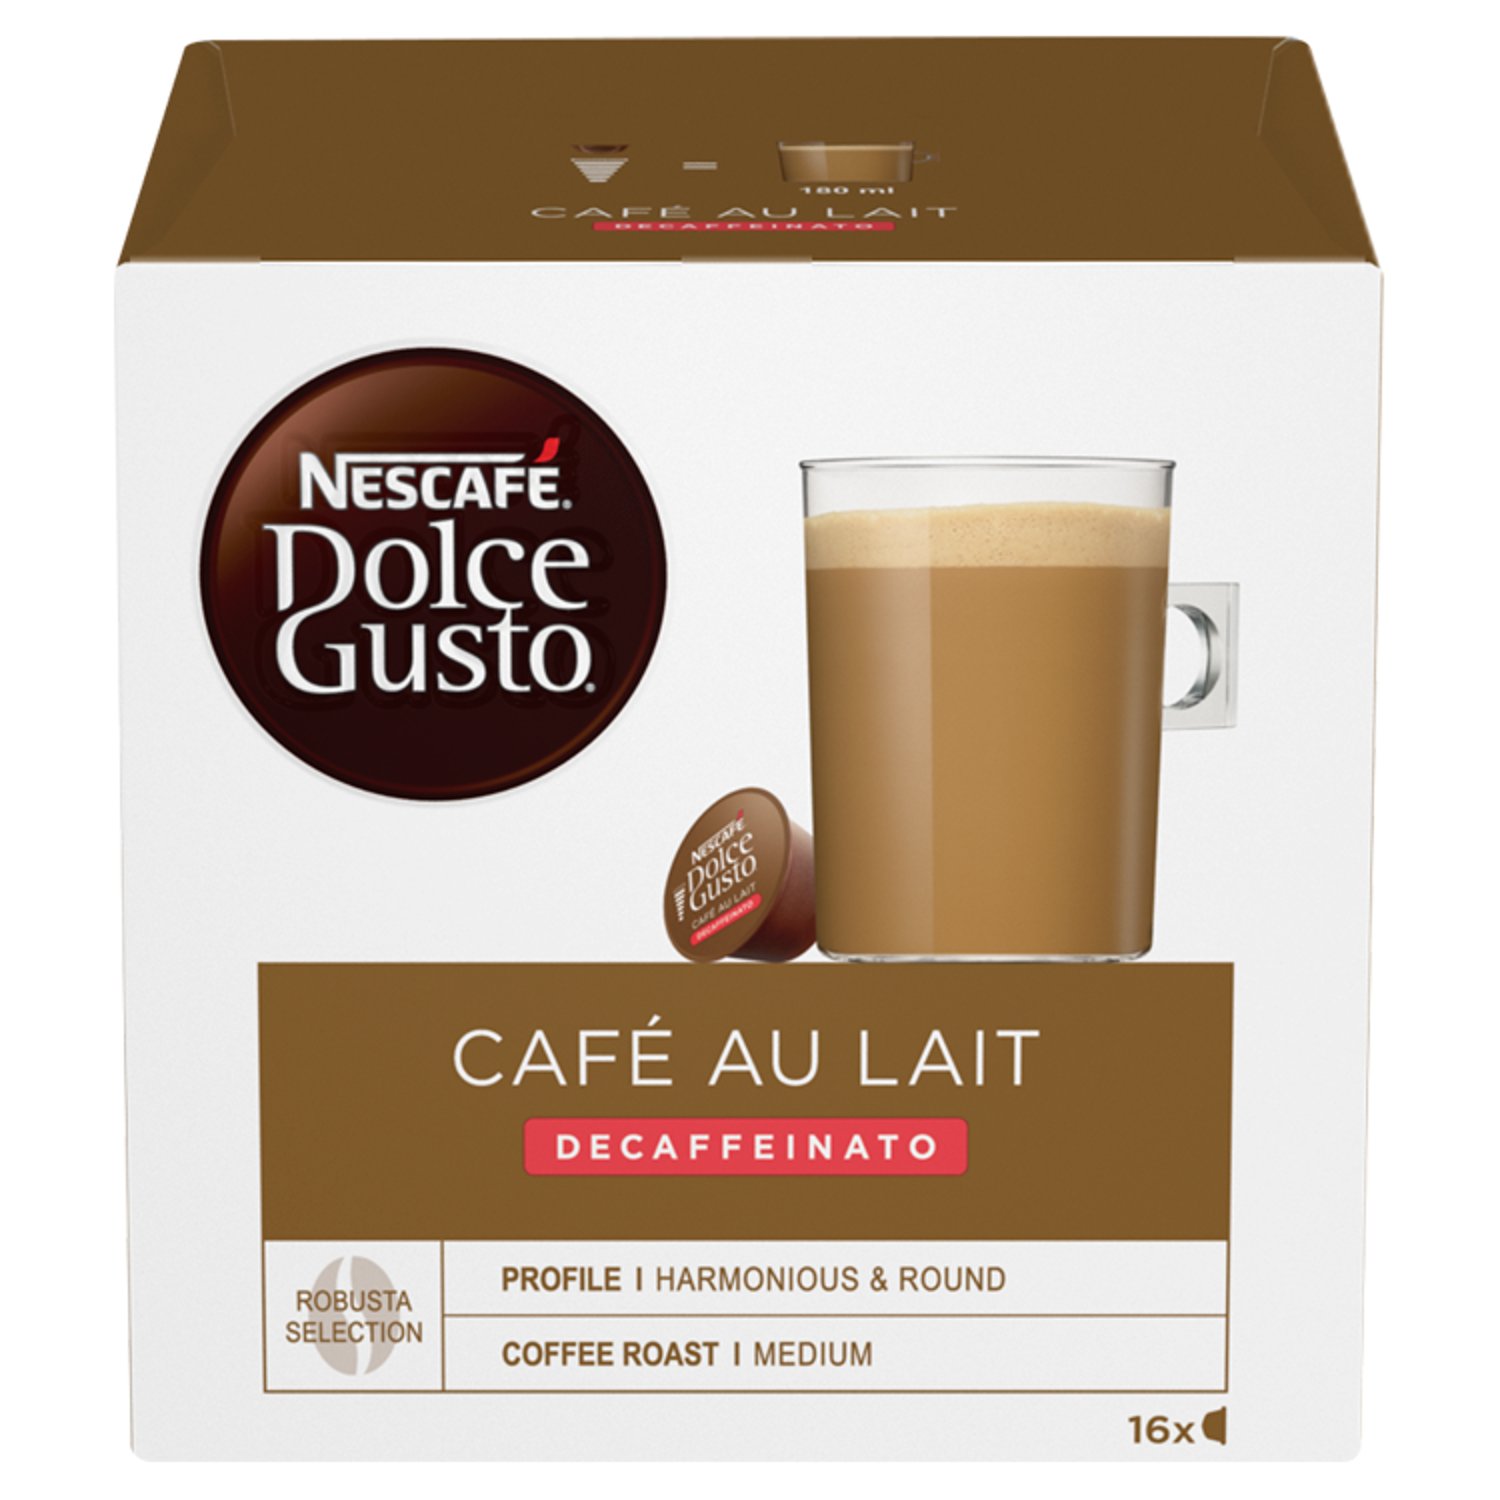 Nescafe Dolce Gusto Cafe Au Lait Decaff Coffee Capsules 16 Pack (160 g)